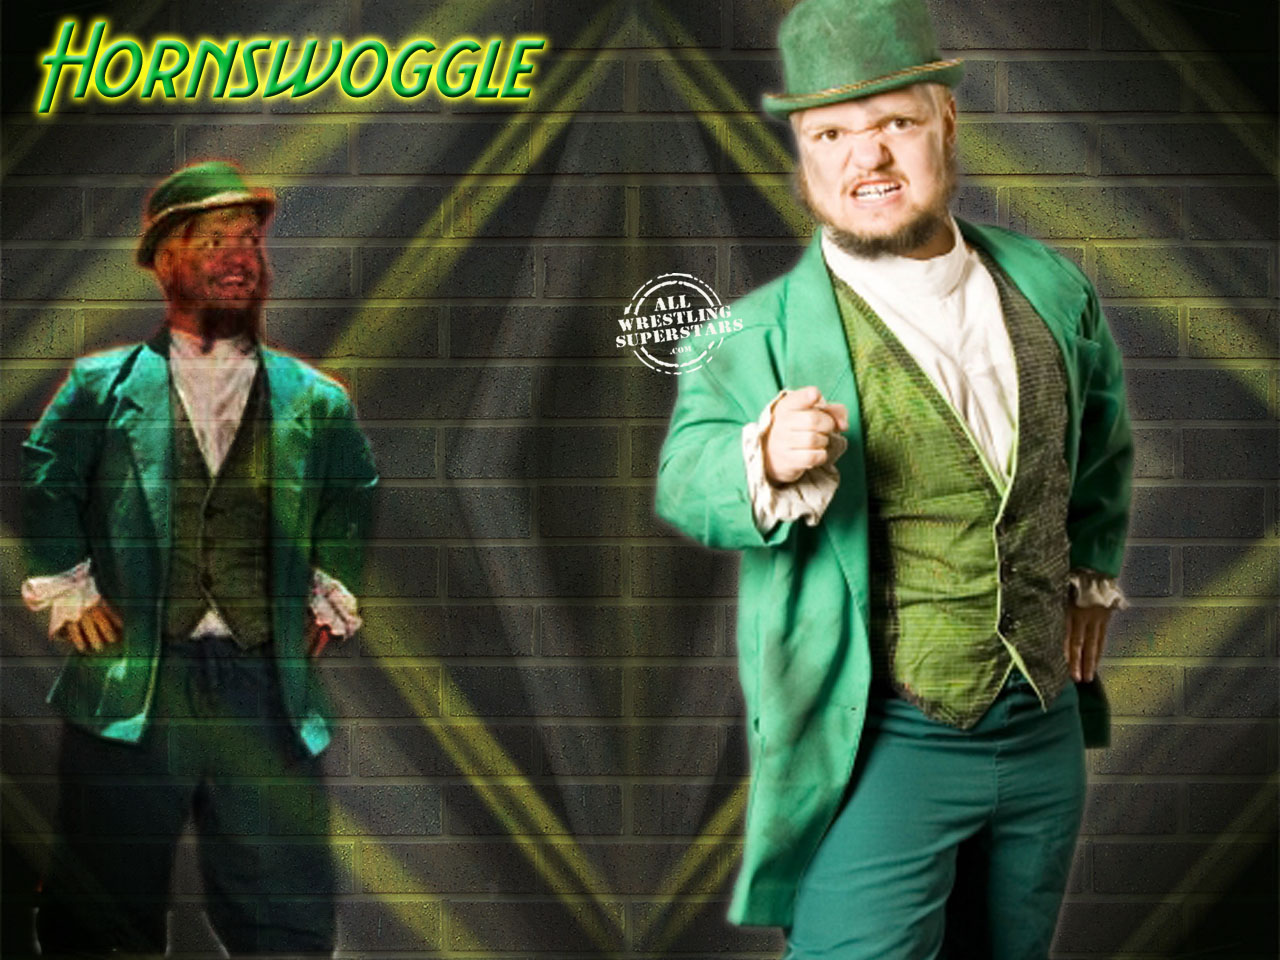 Small Size Frightening Hornswoggle In Green Outfits Click On Image To